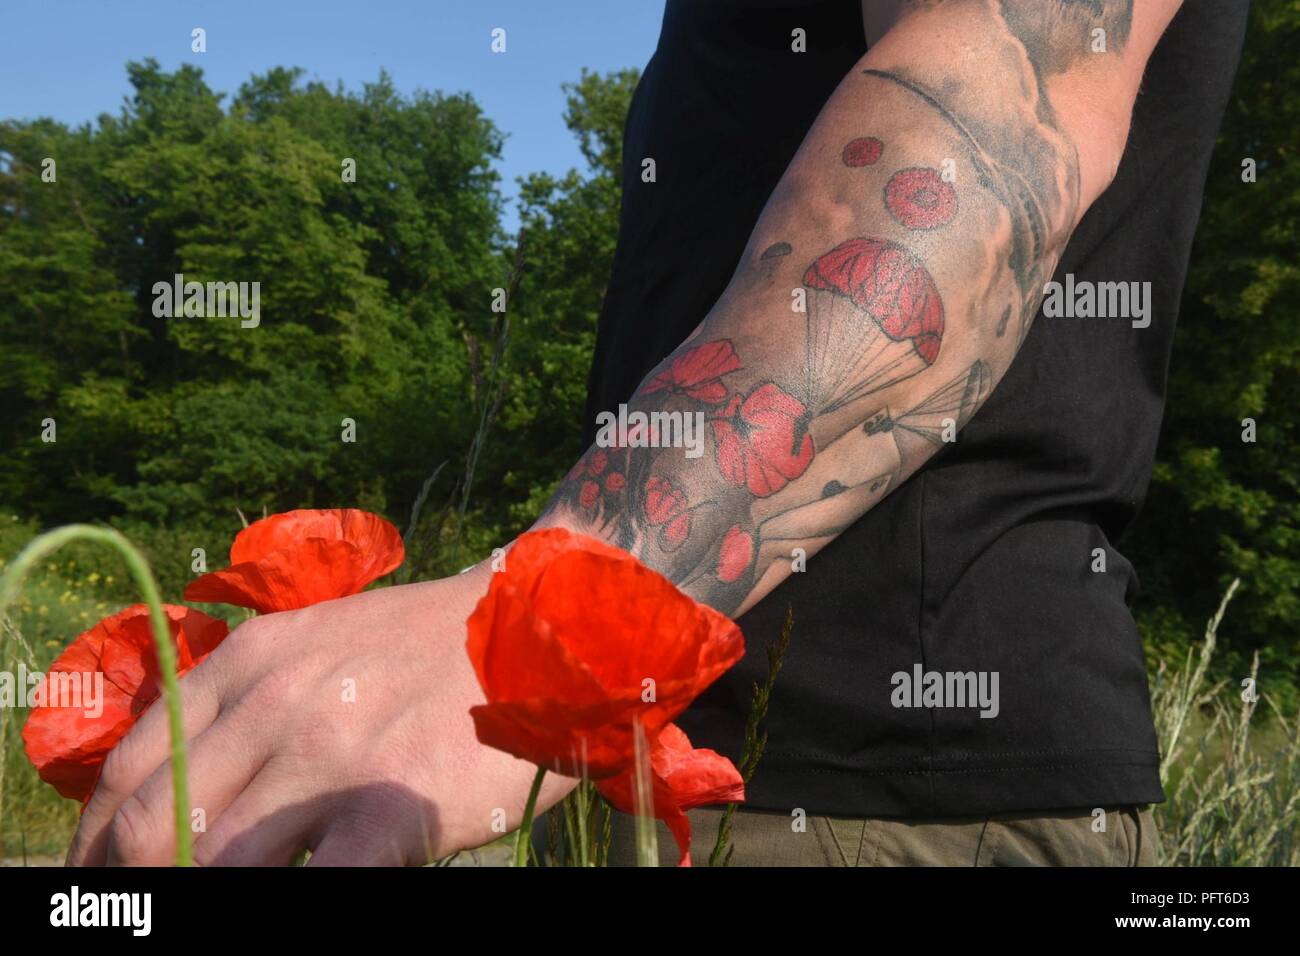 U.S. Army Sgt. 1st Class Nathan Fair, with the Defense POW/MIA Accounting Agency (DPAA) picks a red poppy from a field in Boussicourt, France, May 22, 2018. Fair was part of a team from DPAA sent to excavate a location where a Consolidated B-24 “Liberator” bomber crashed in 1944. DPAA's mission is to provide the fullest possible accounting for our missing personnel to their families and the nation. Stock Photo